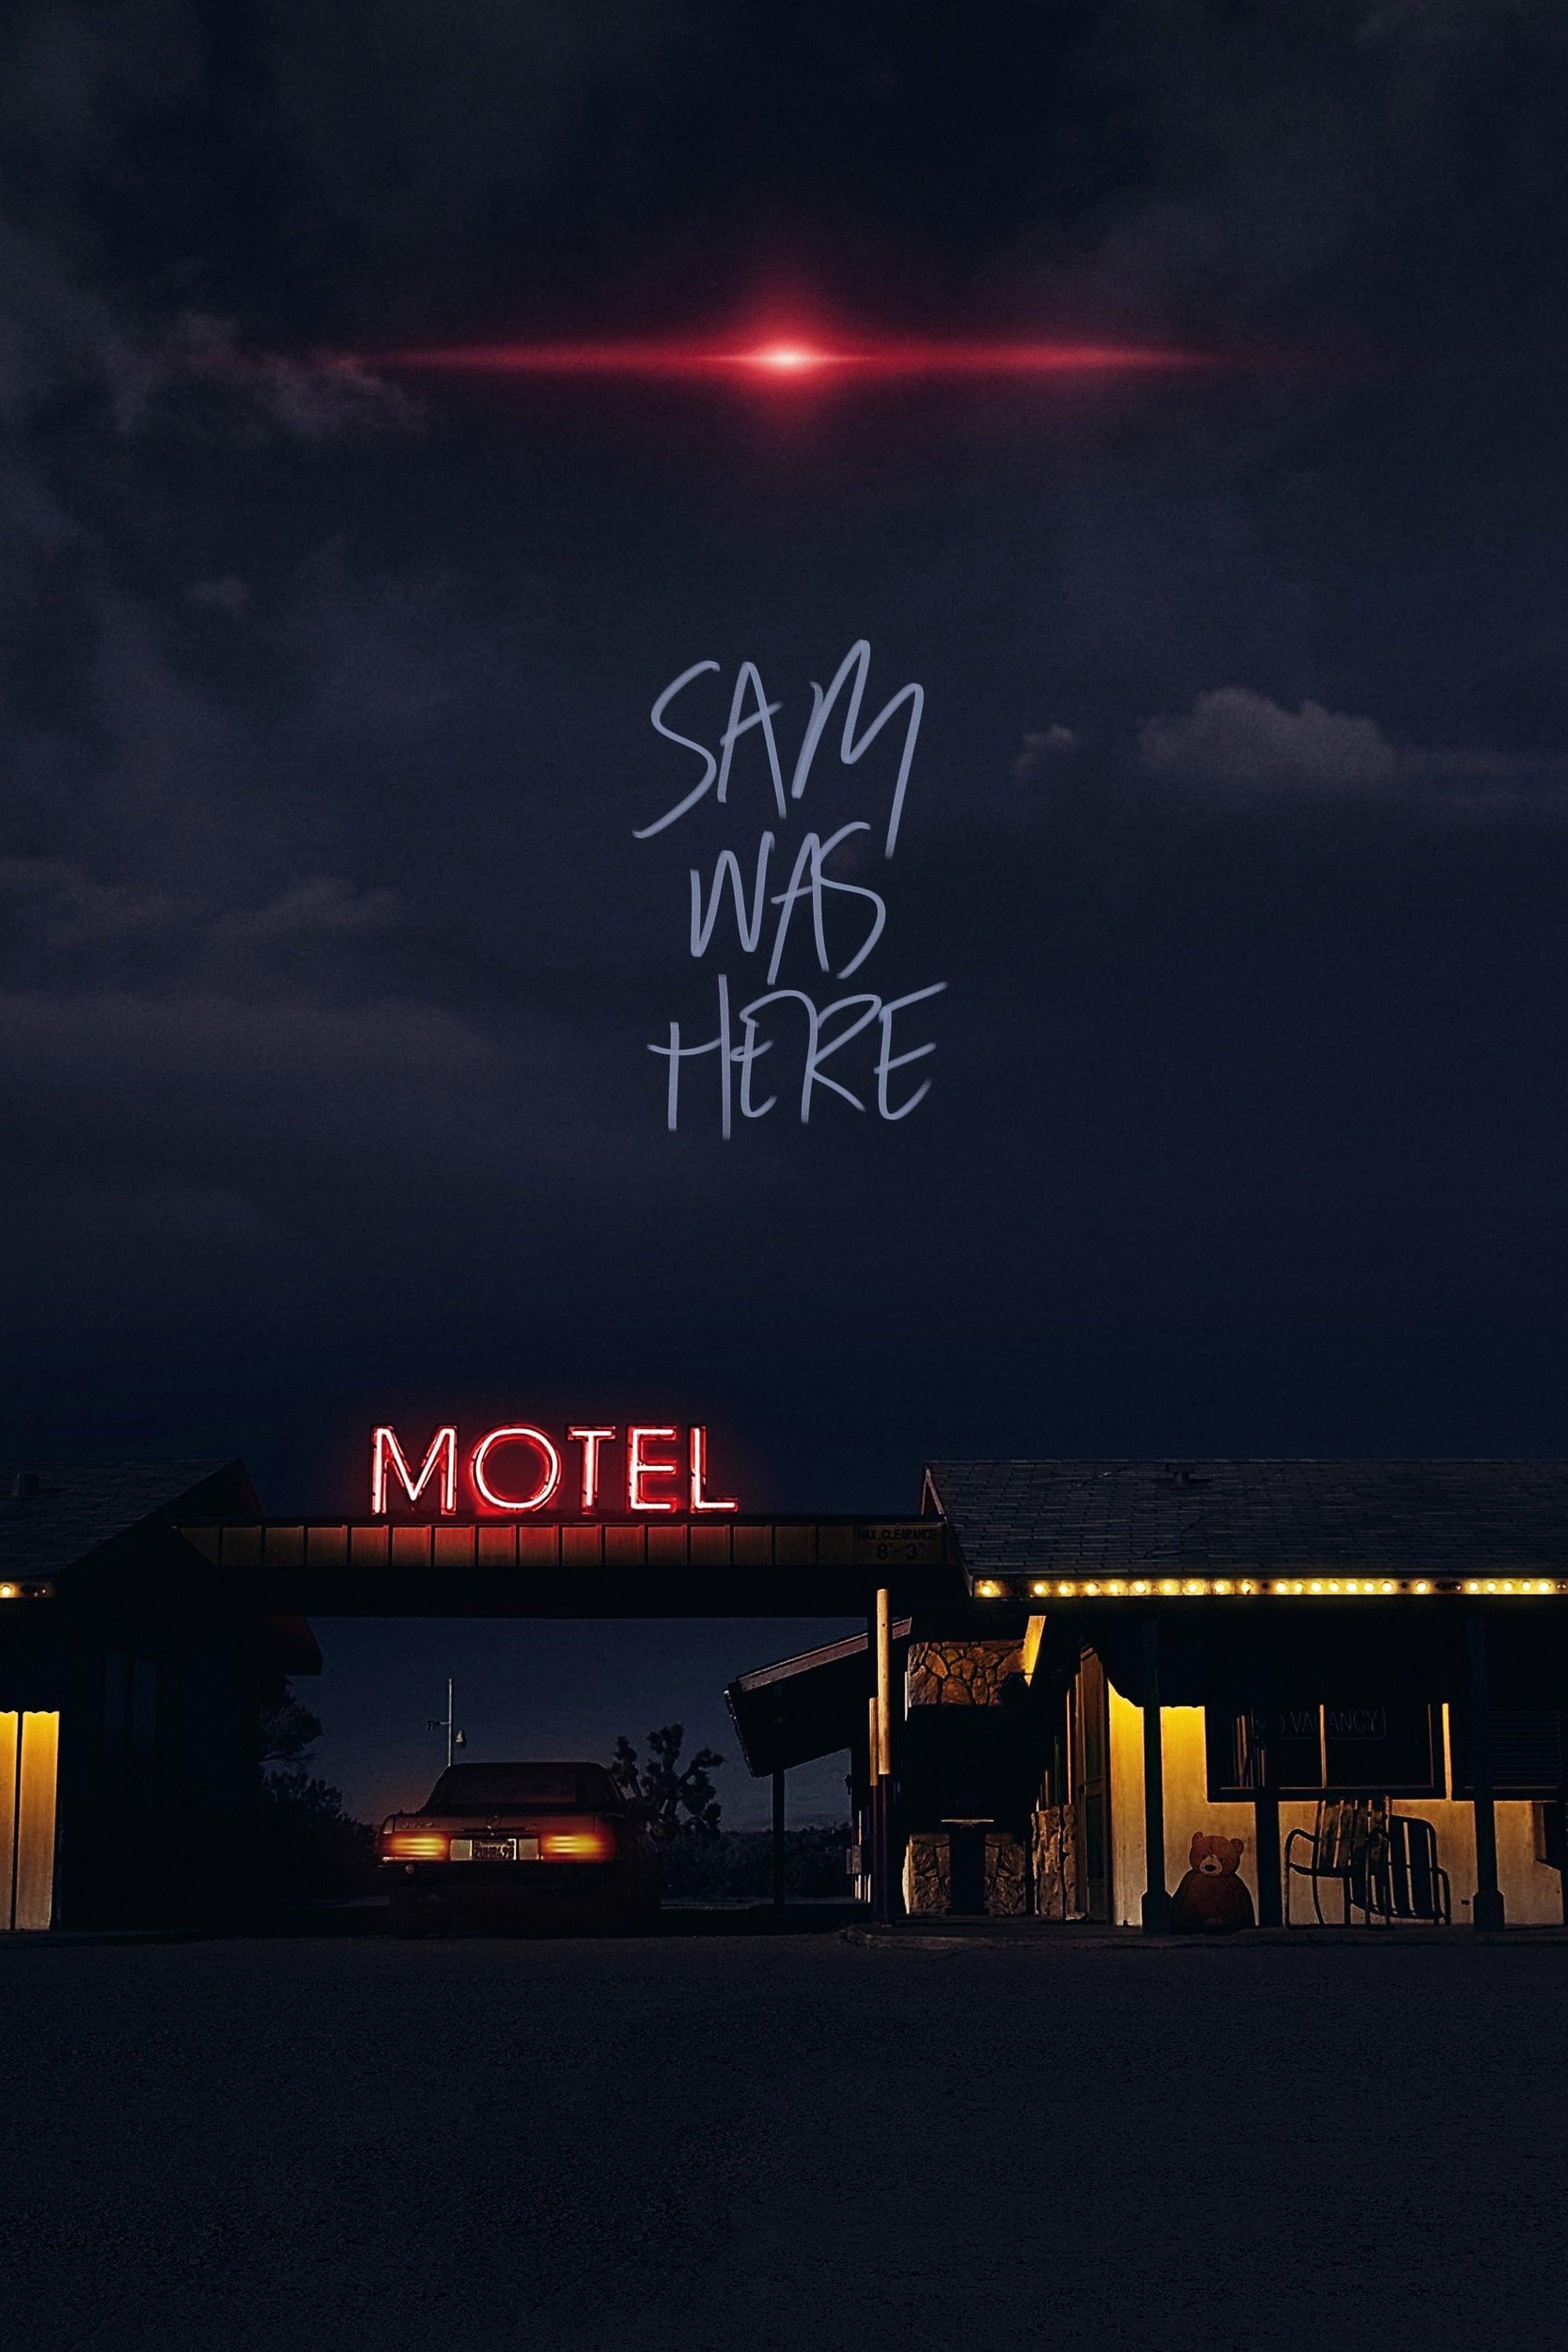 Sam Was Here poster